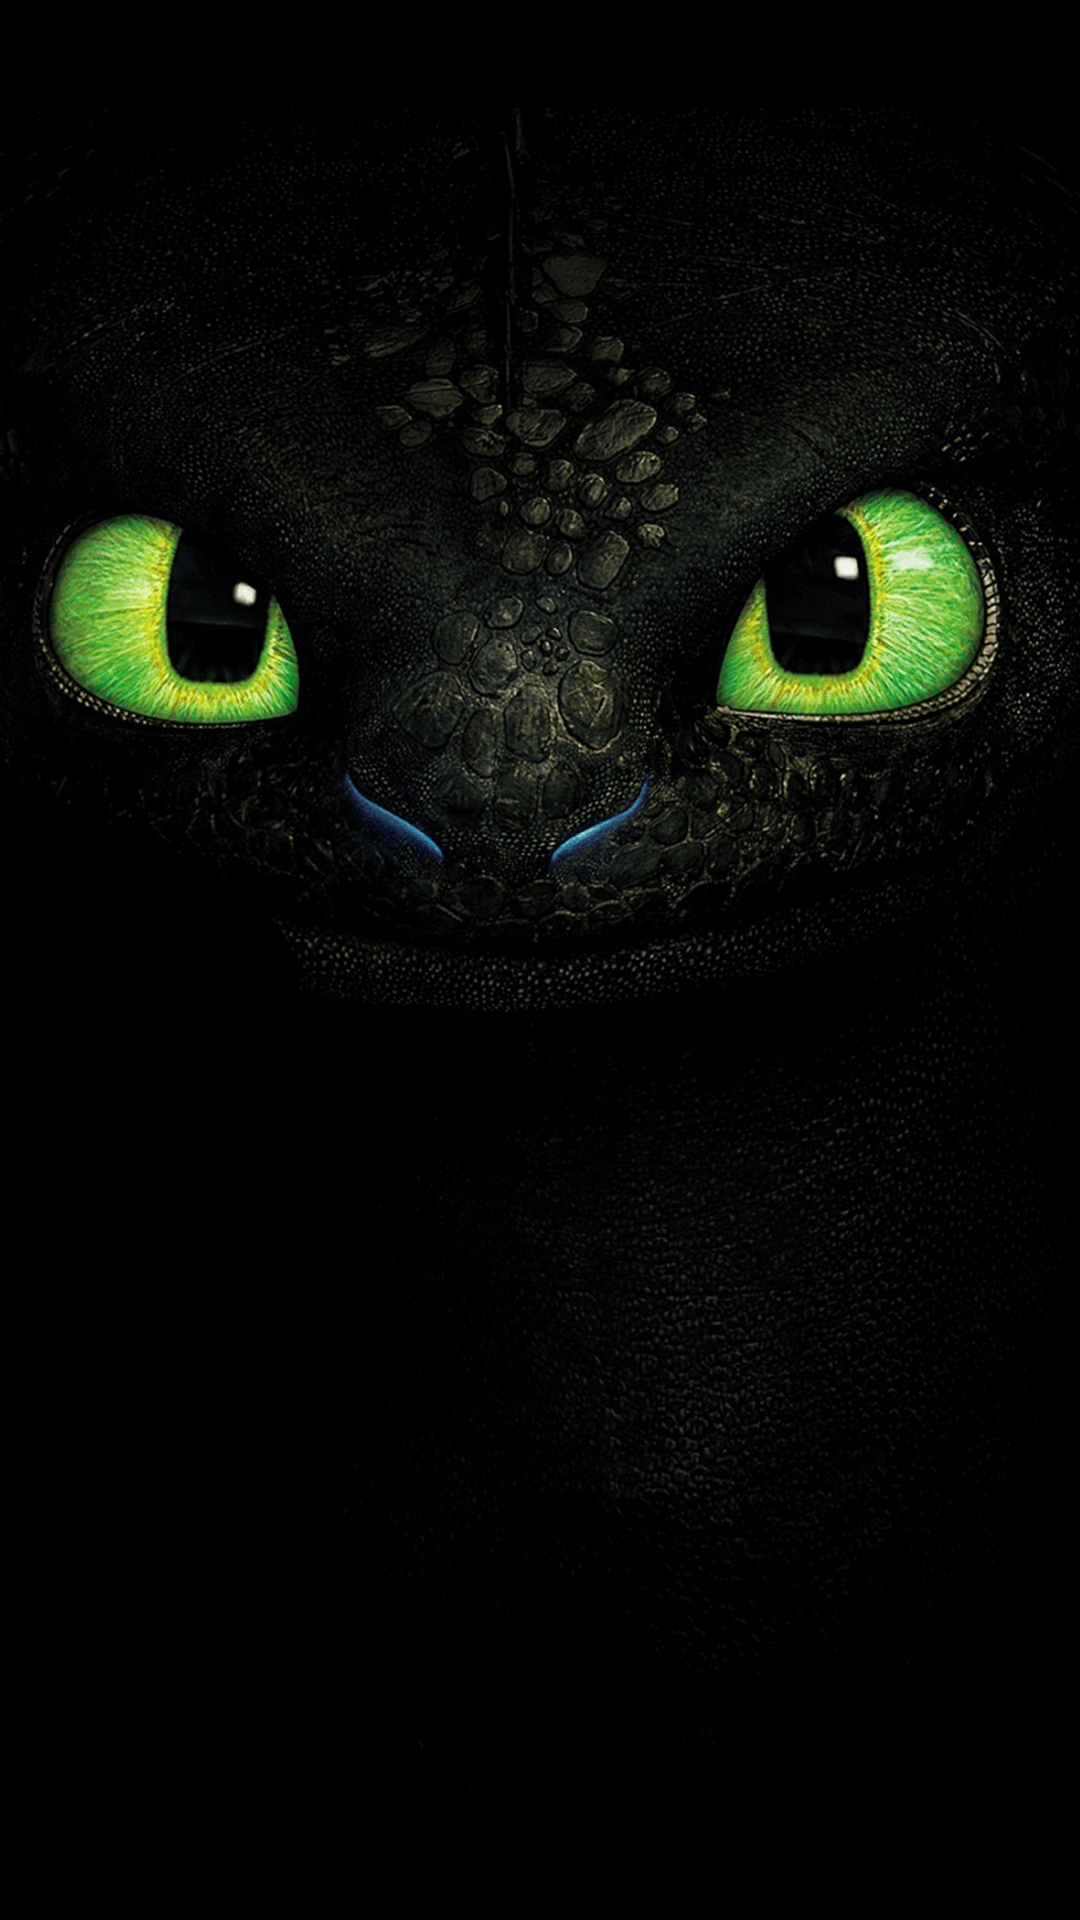 Ultra HD Toothless Dragon Wallpaper For Your Mobile Phone .0550